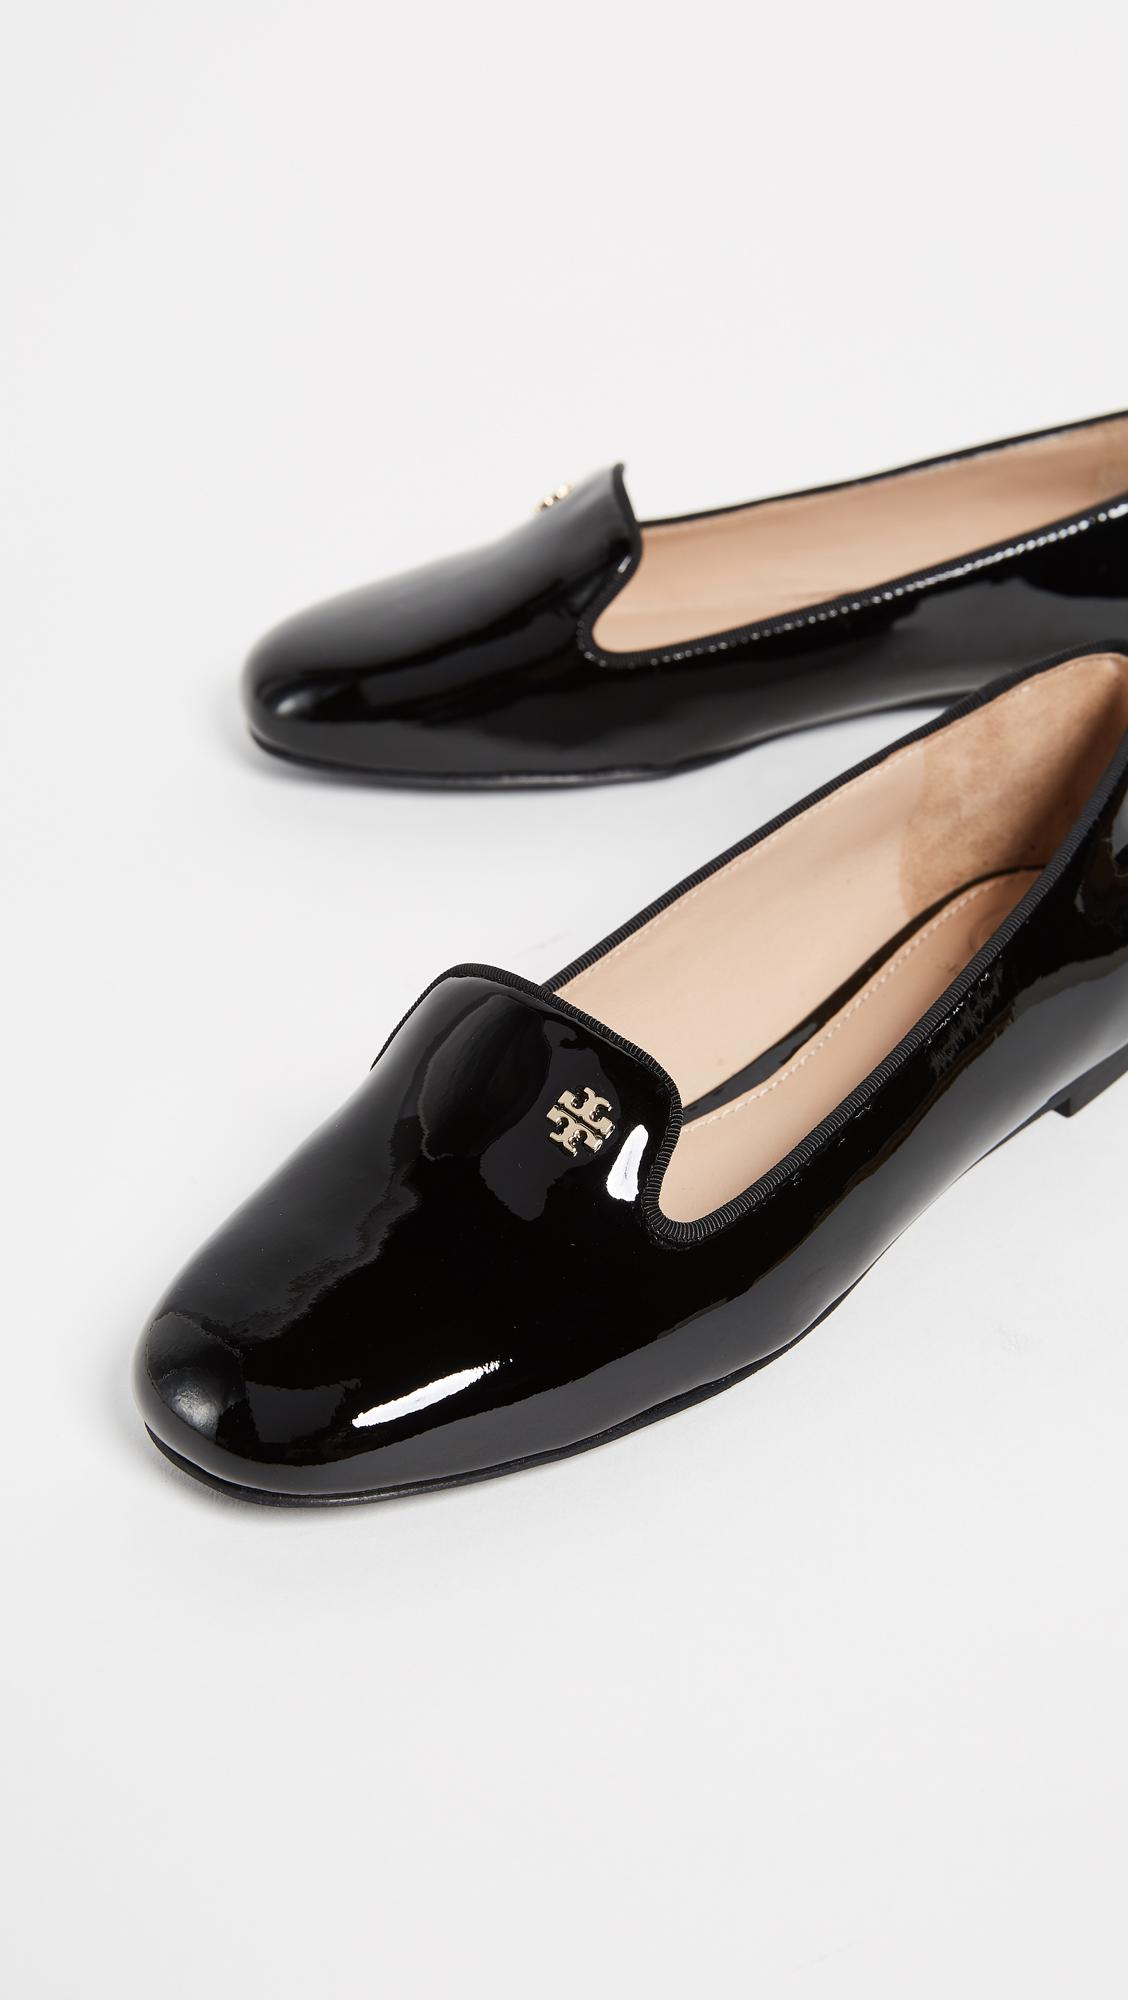 Tory Burch Leather Samantha Smoking Slippers in Black - Lyst